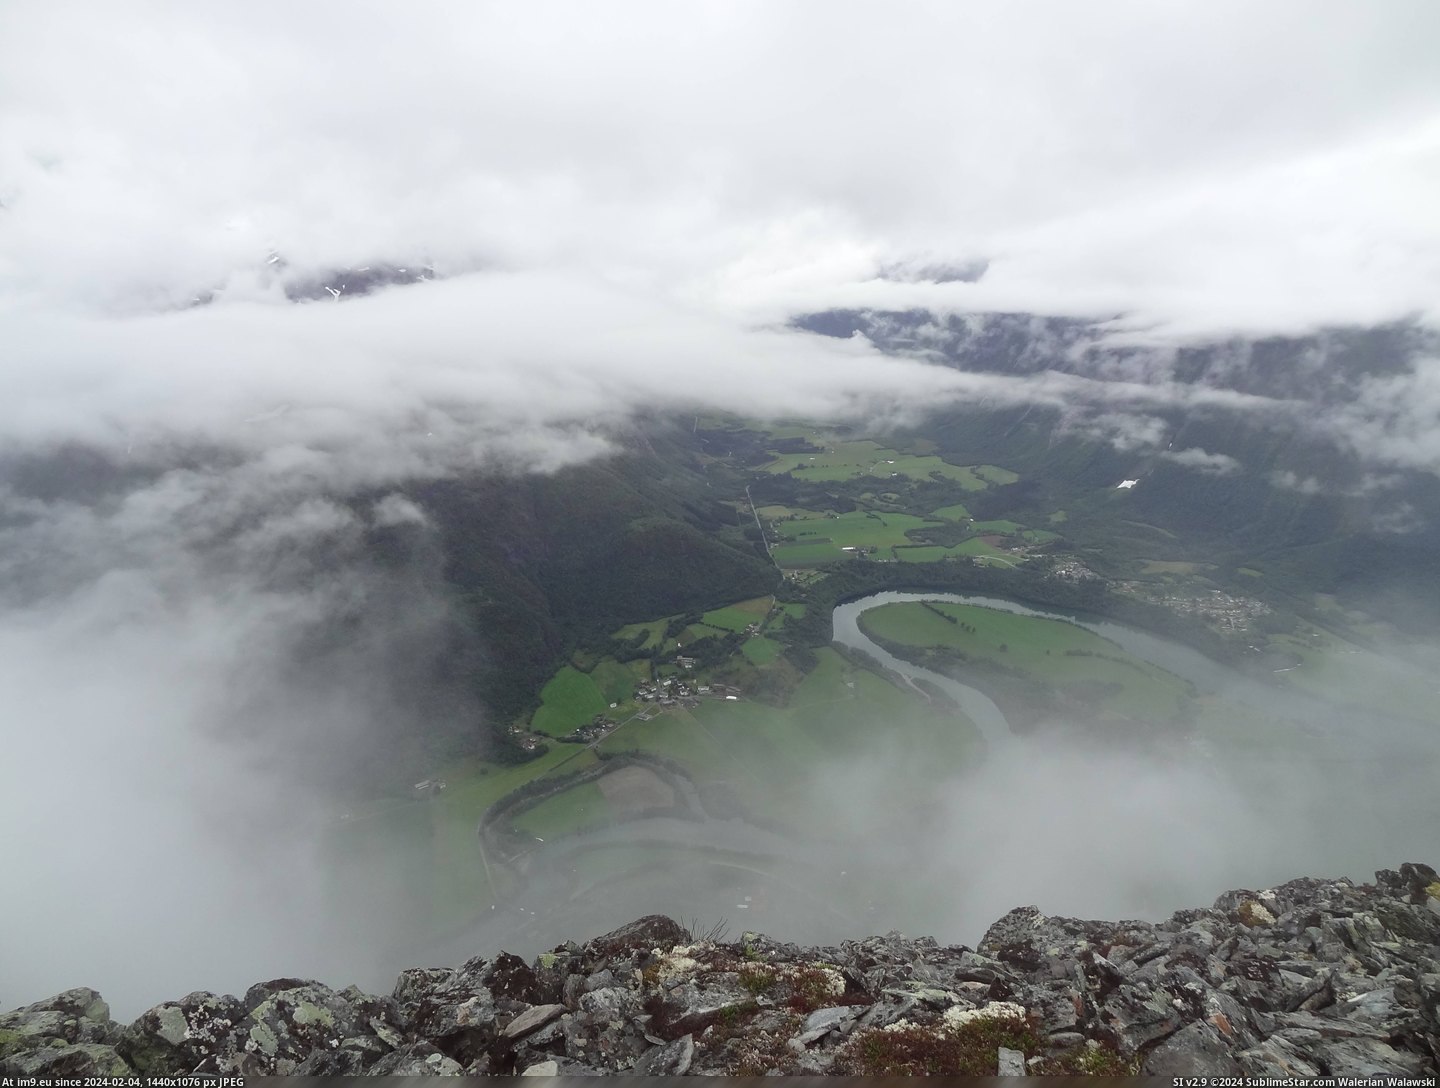 #Valley #4608x3456 #Ridge #Clouds [Earthporn]  Looking through the clouds to the valley below, on the Romsdalseggen Ridge [4608x3456] Pic. (Image of album My r/EARTHPORN favs))